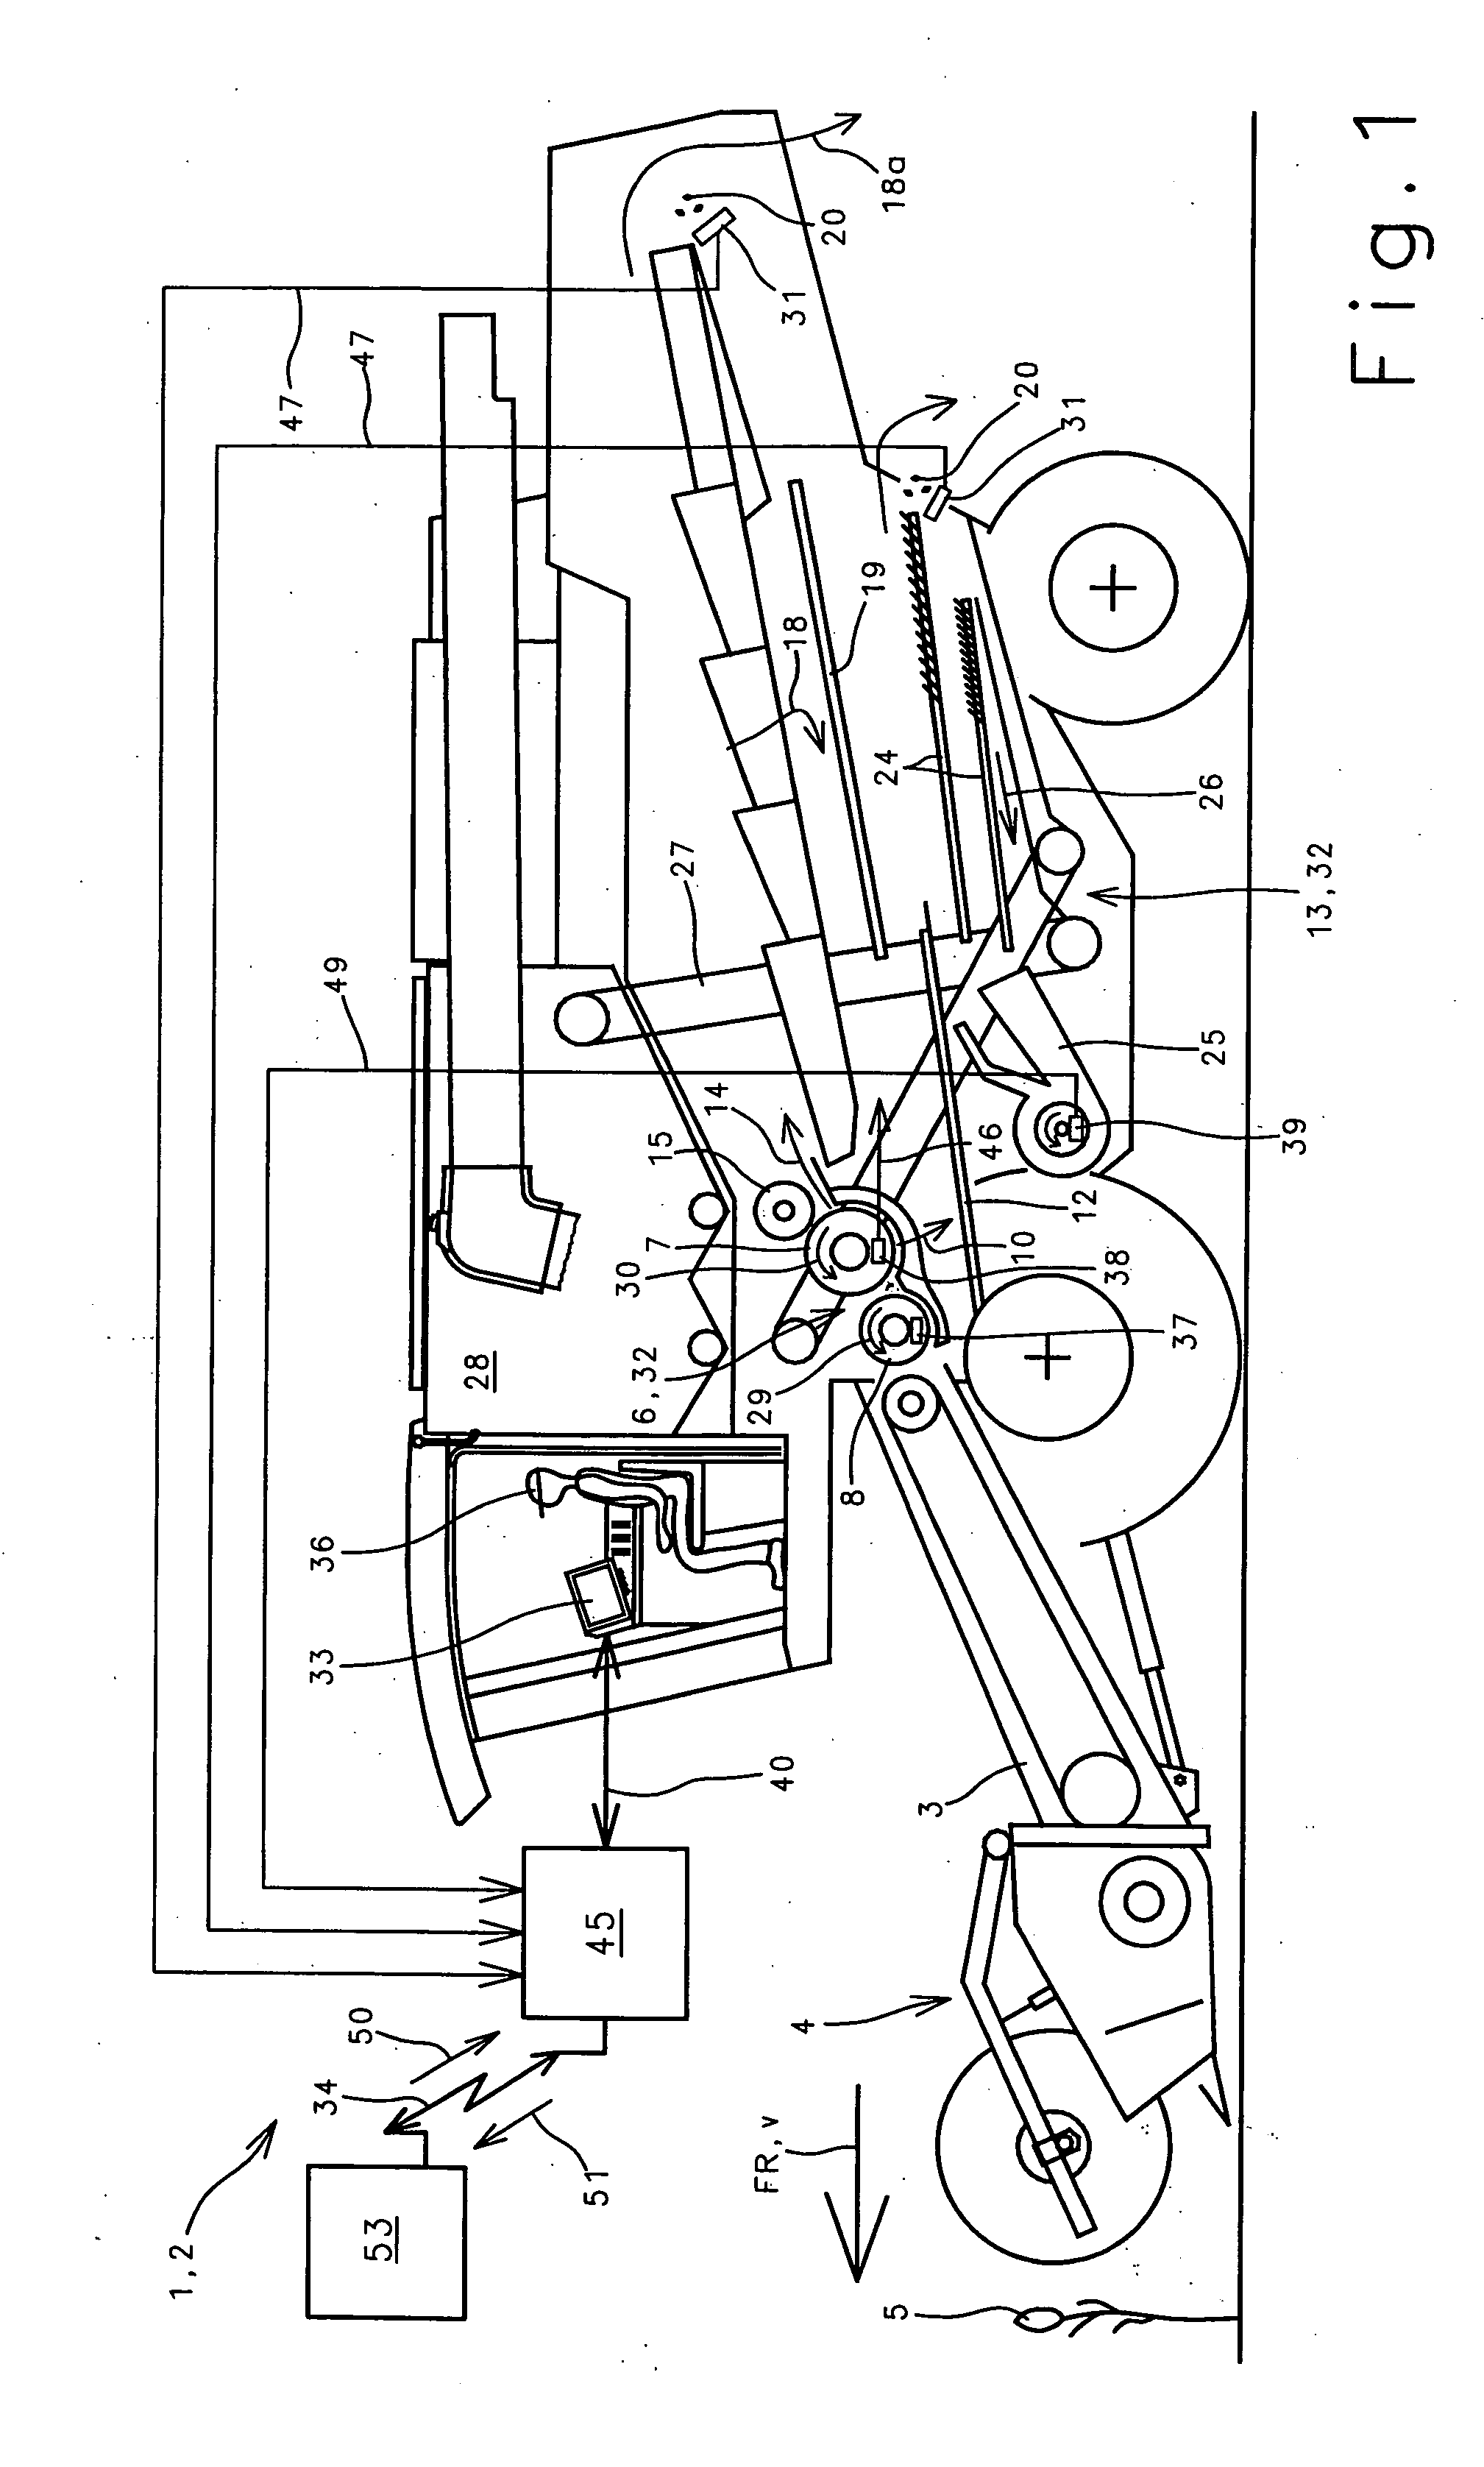 Method and device for optimizing operating parameters of an agricultural working machine